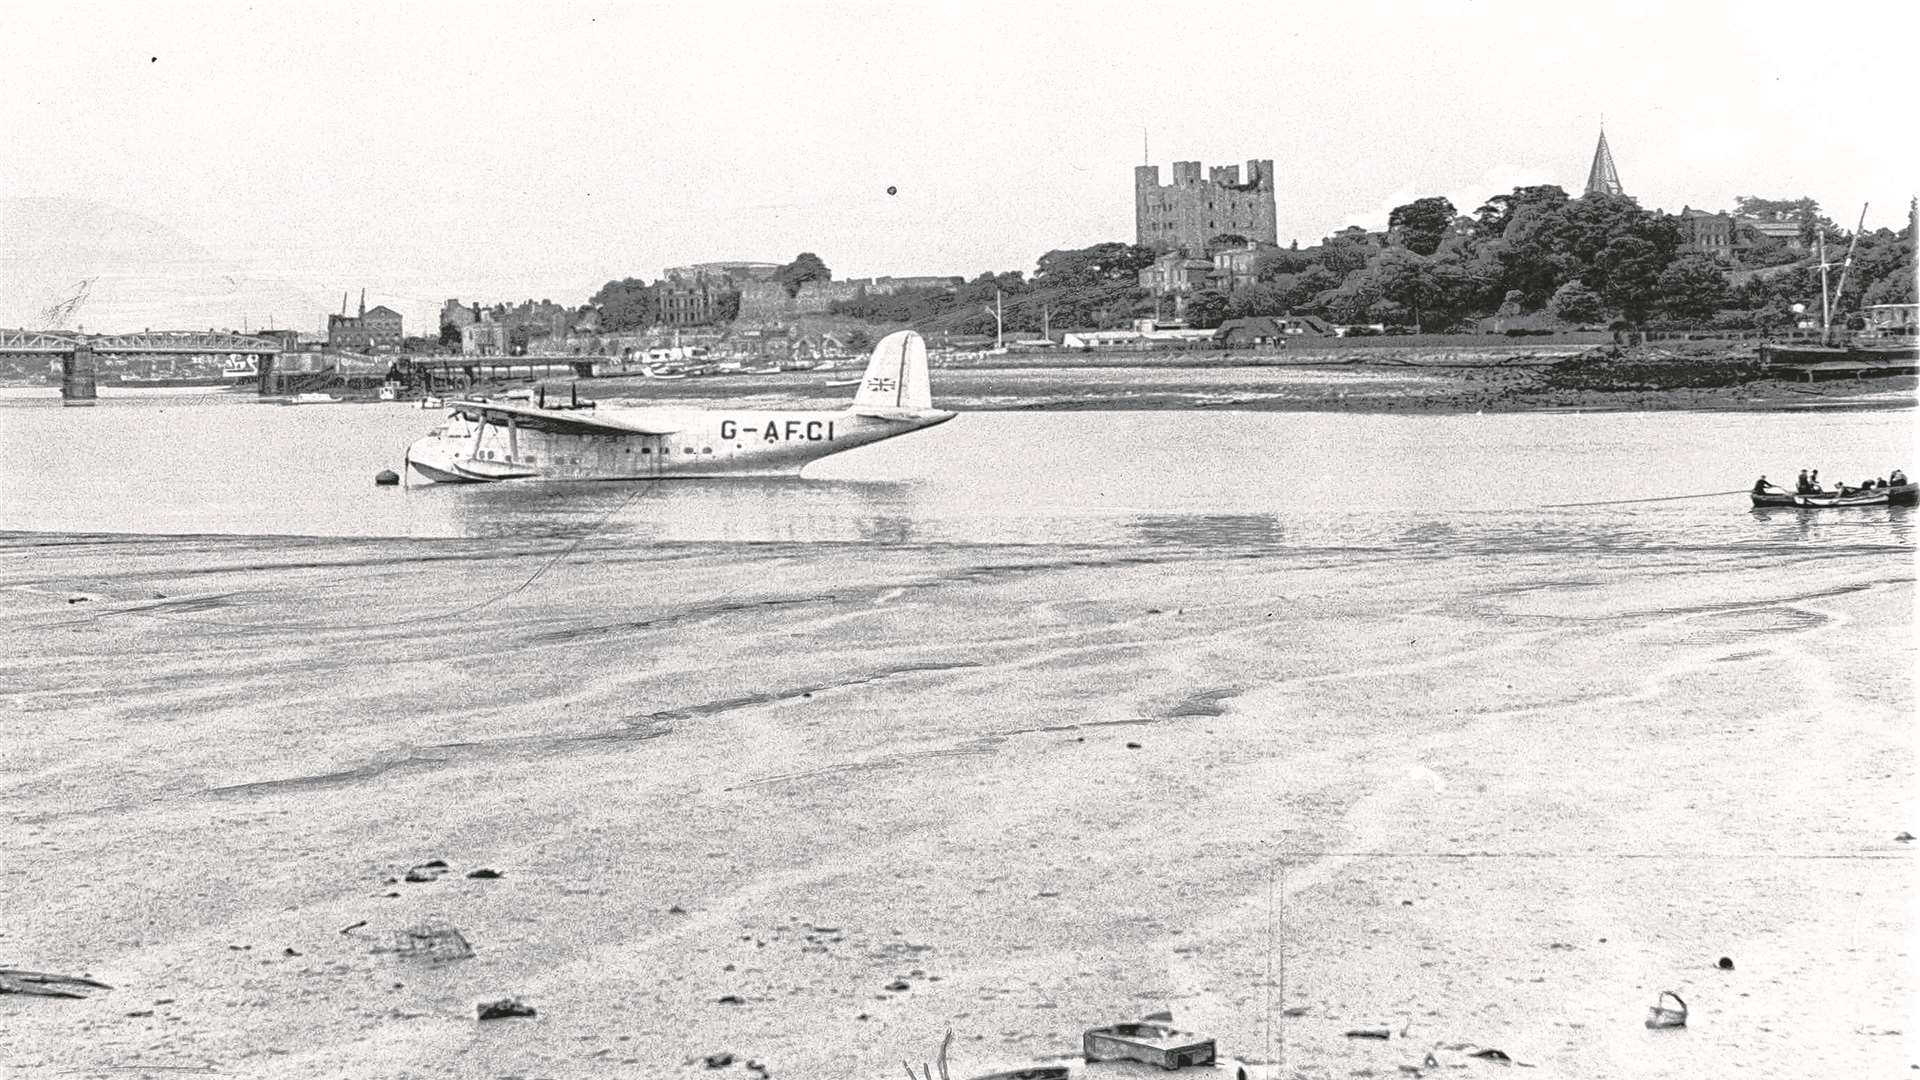 A Short Brothers flying boat on the River Medway at Rochester in 1948